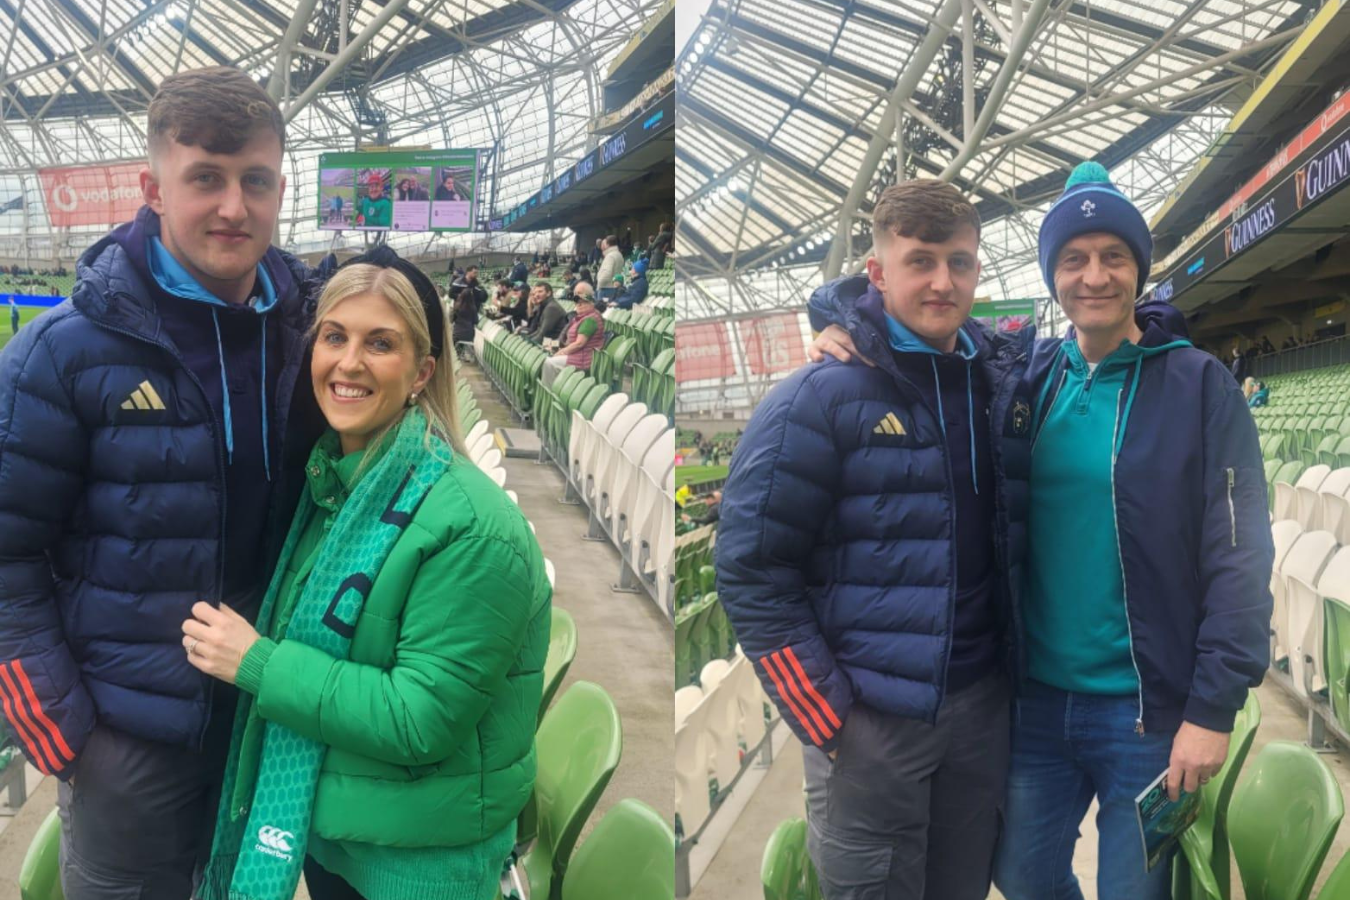 Alex’s Wish to see the Irish Rugby team in action.